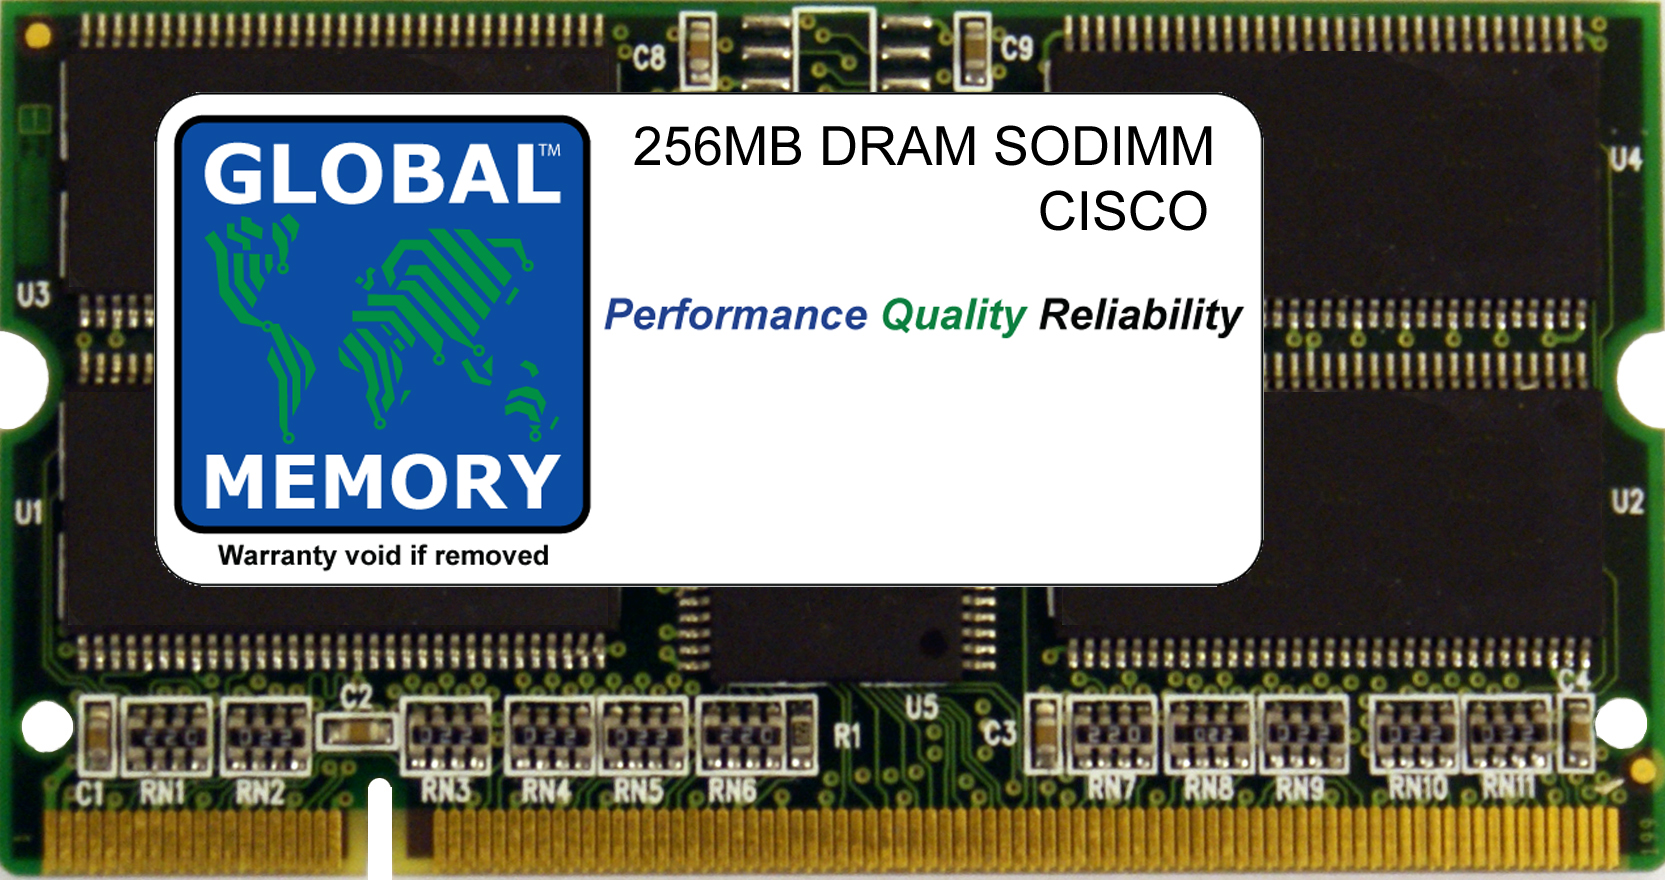 256MB DRAM SODIMM RAM FOR CISCO CATALYST 6000 SERIES SWITCHES DISTRIBUTED FORWARDING CARD (MEM-DFC-256M)